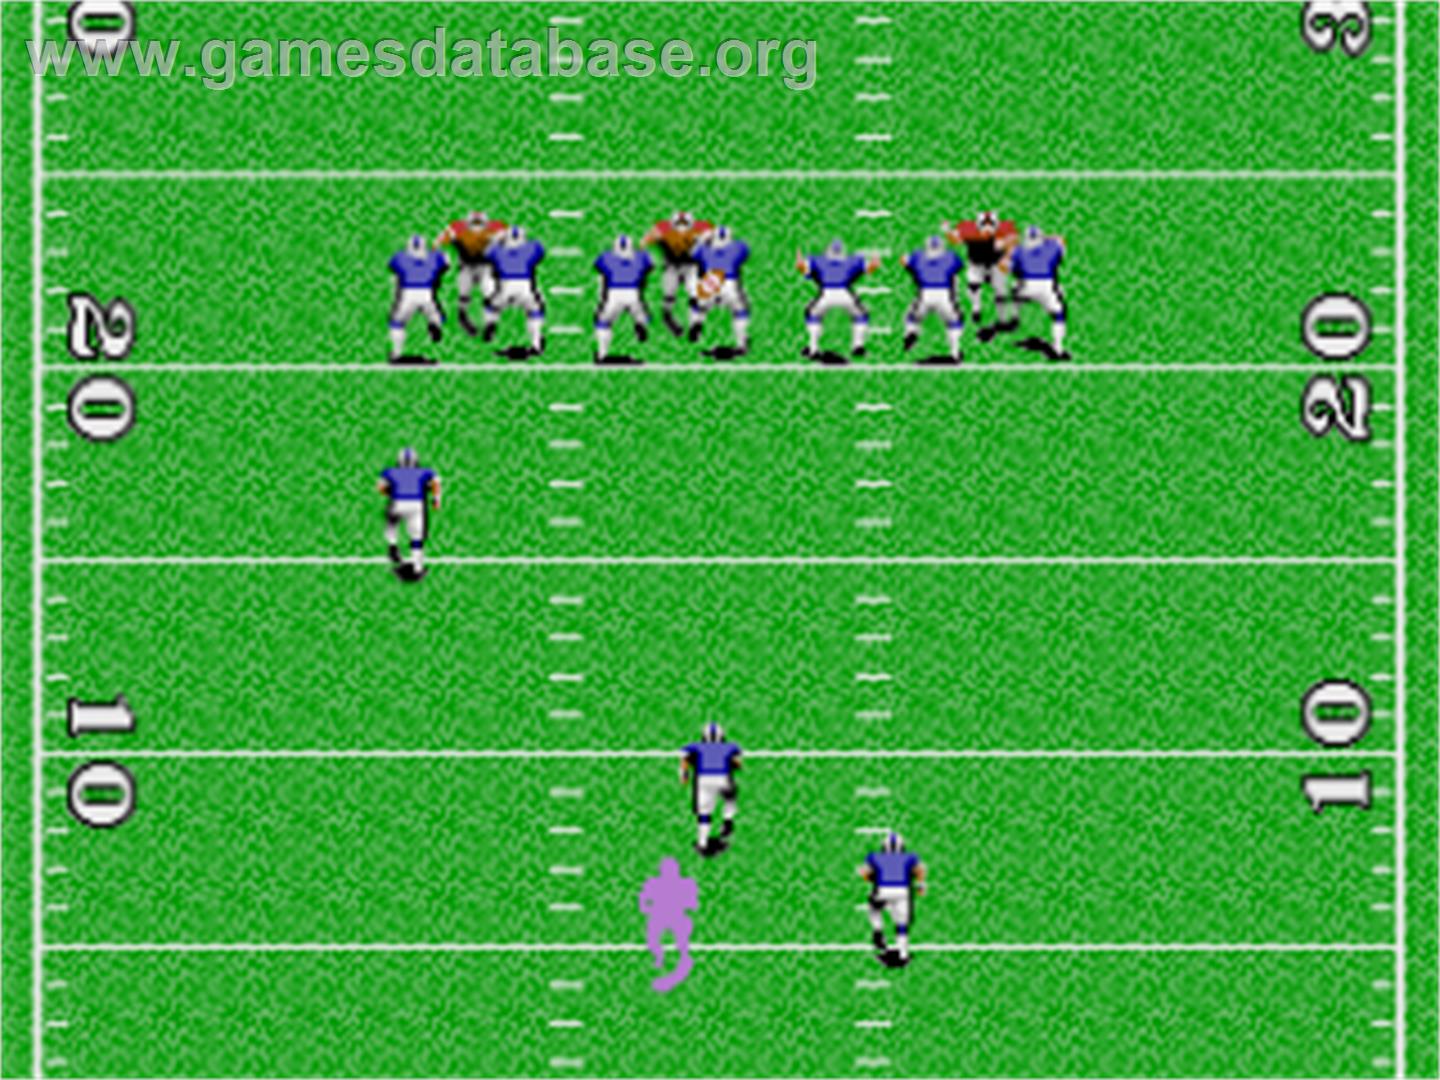 TV Sports: Football - NEC PC Engine - Artwork - In Game